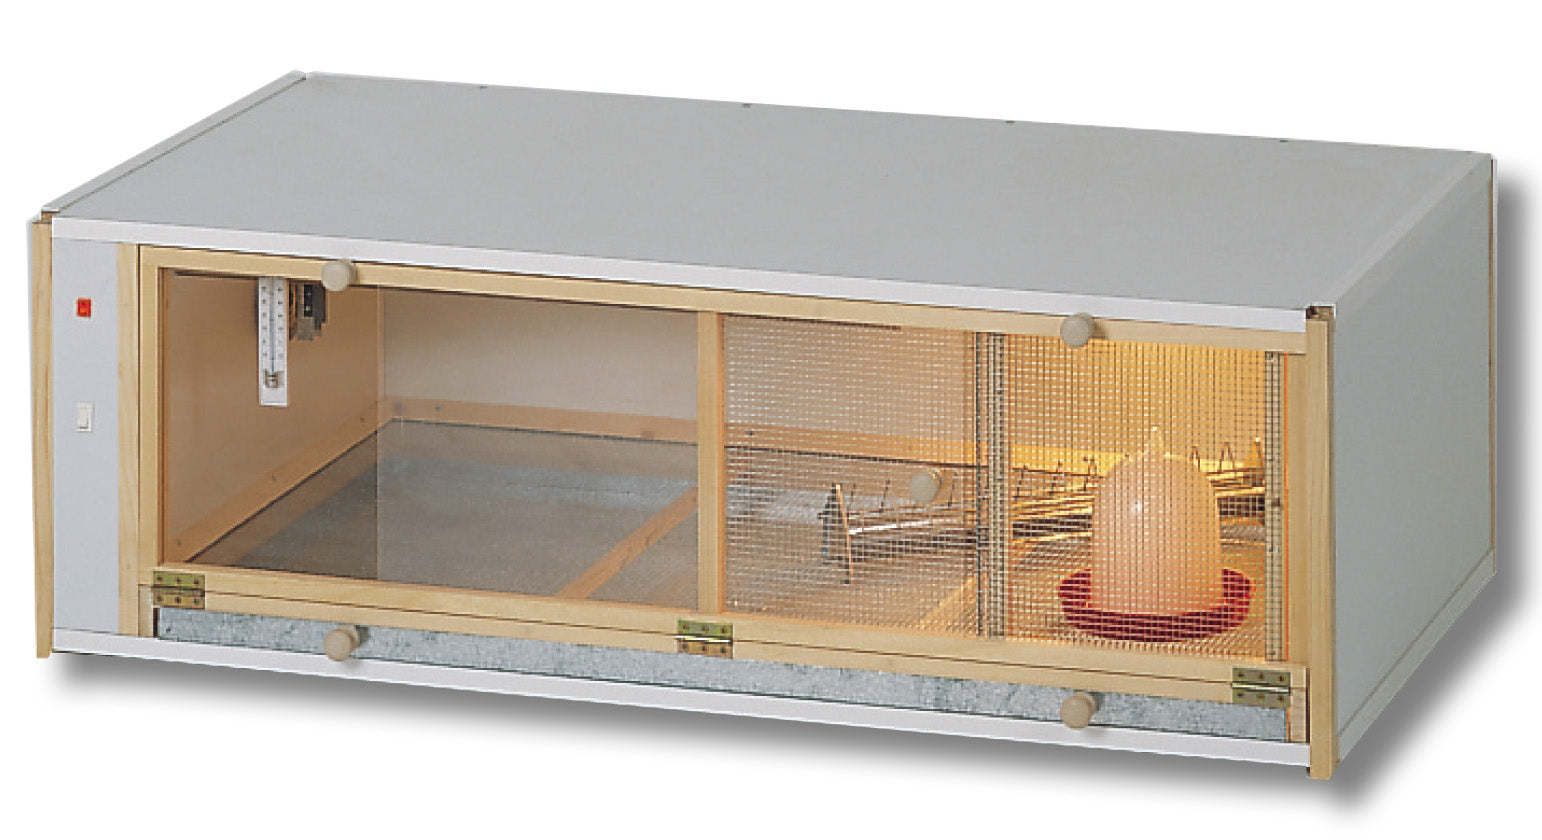 Wooden Brooder Box for up to 60-70 chicks, 102x50x39cm